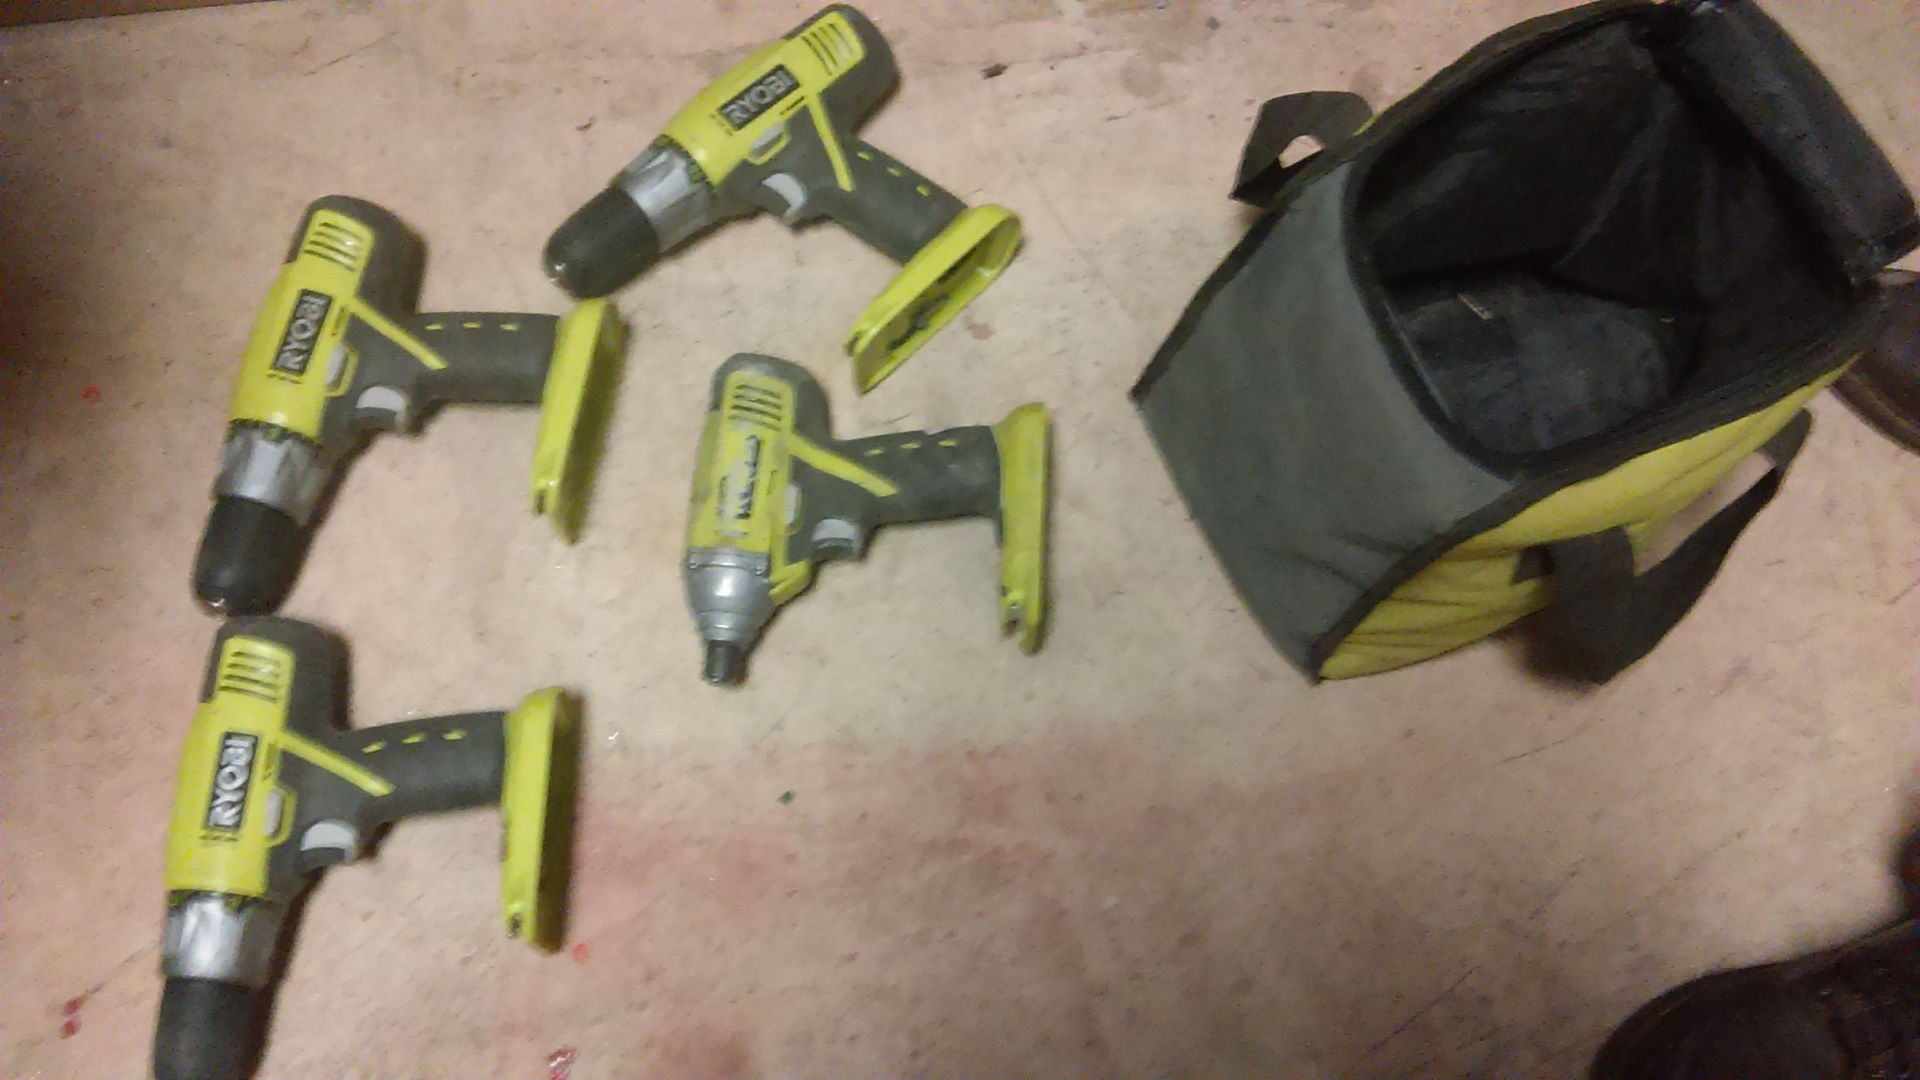 RYOBI IMPACT AND 3 DRIVERS, ONE CASE, NO BATTERIES, NO CHARGERS